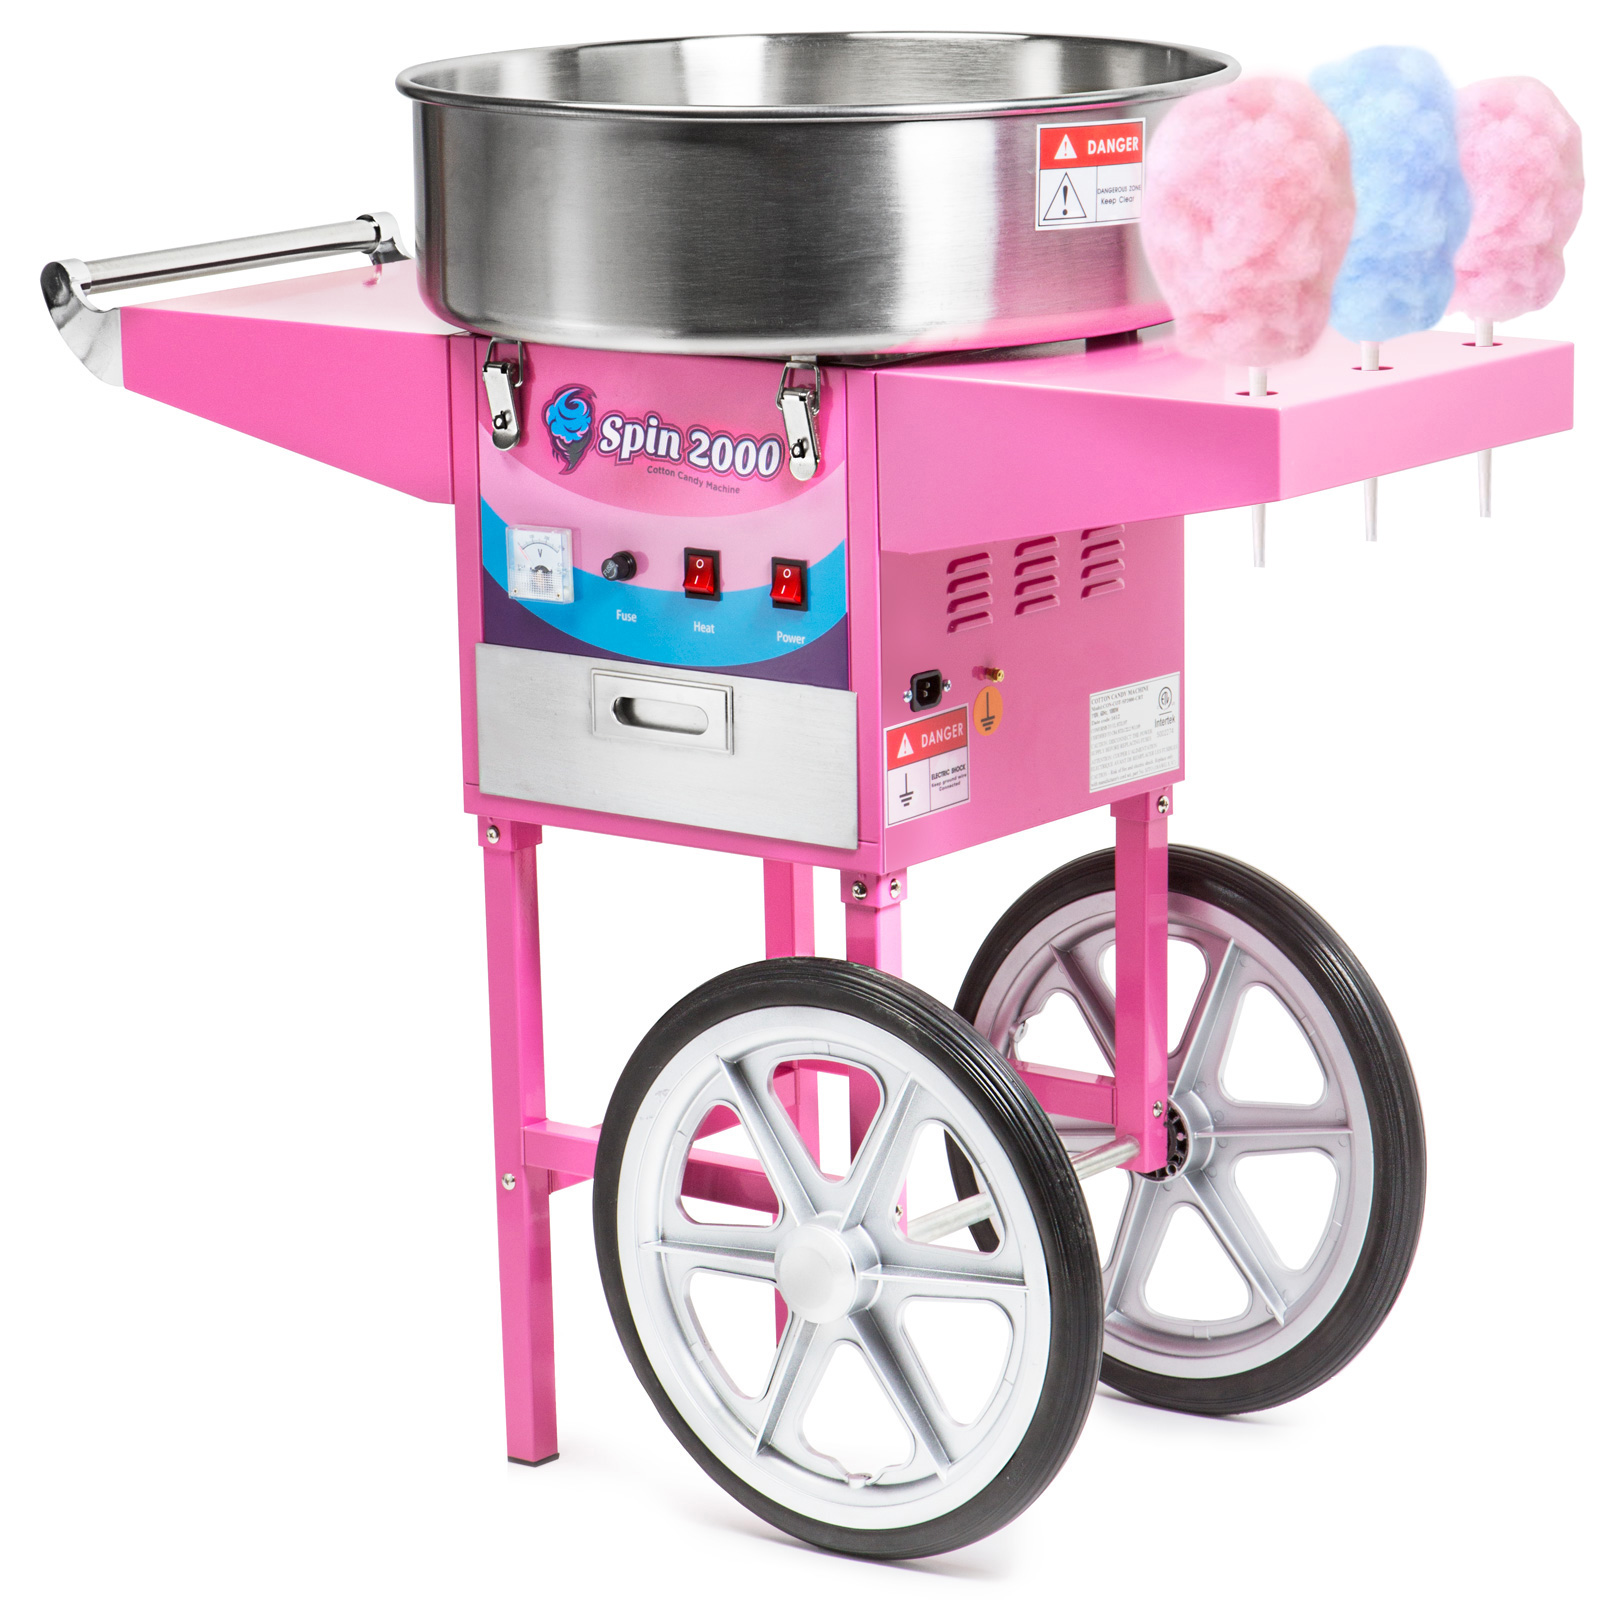 Olde Midway Commercial Quality Cotton Candy Machine